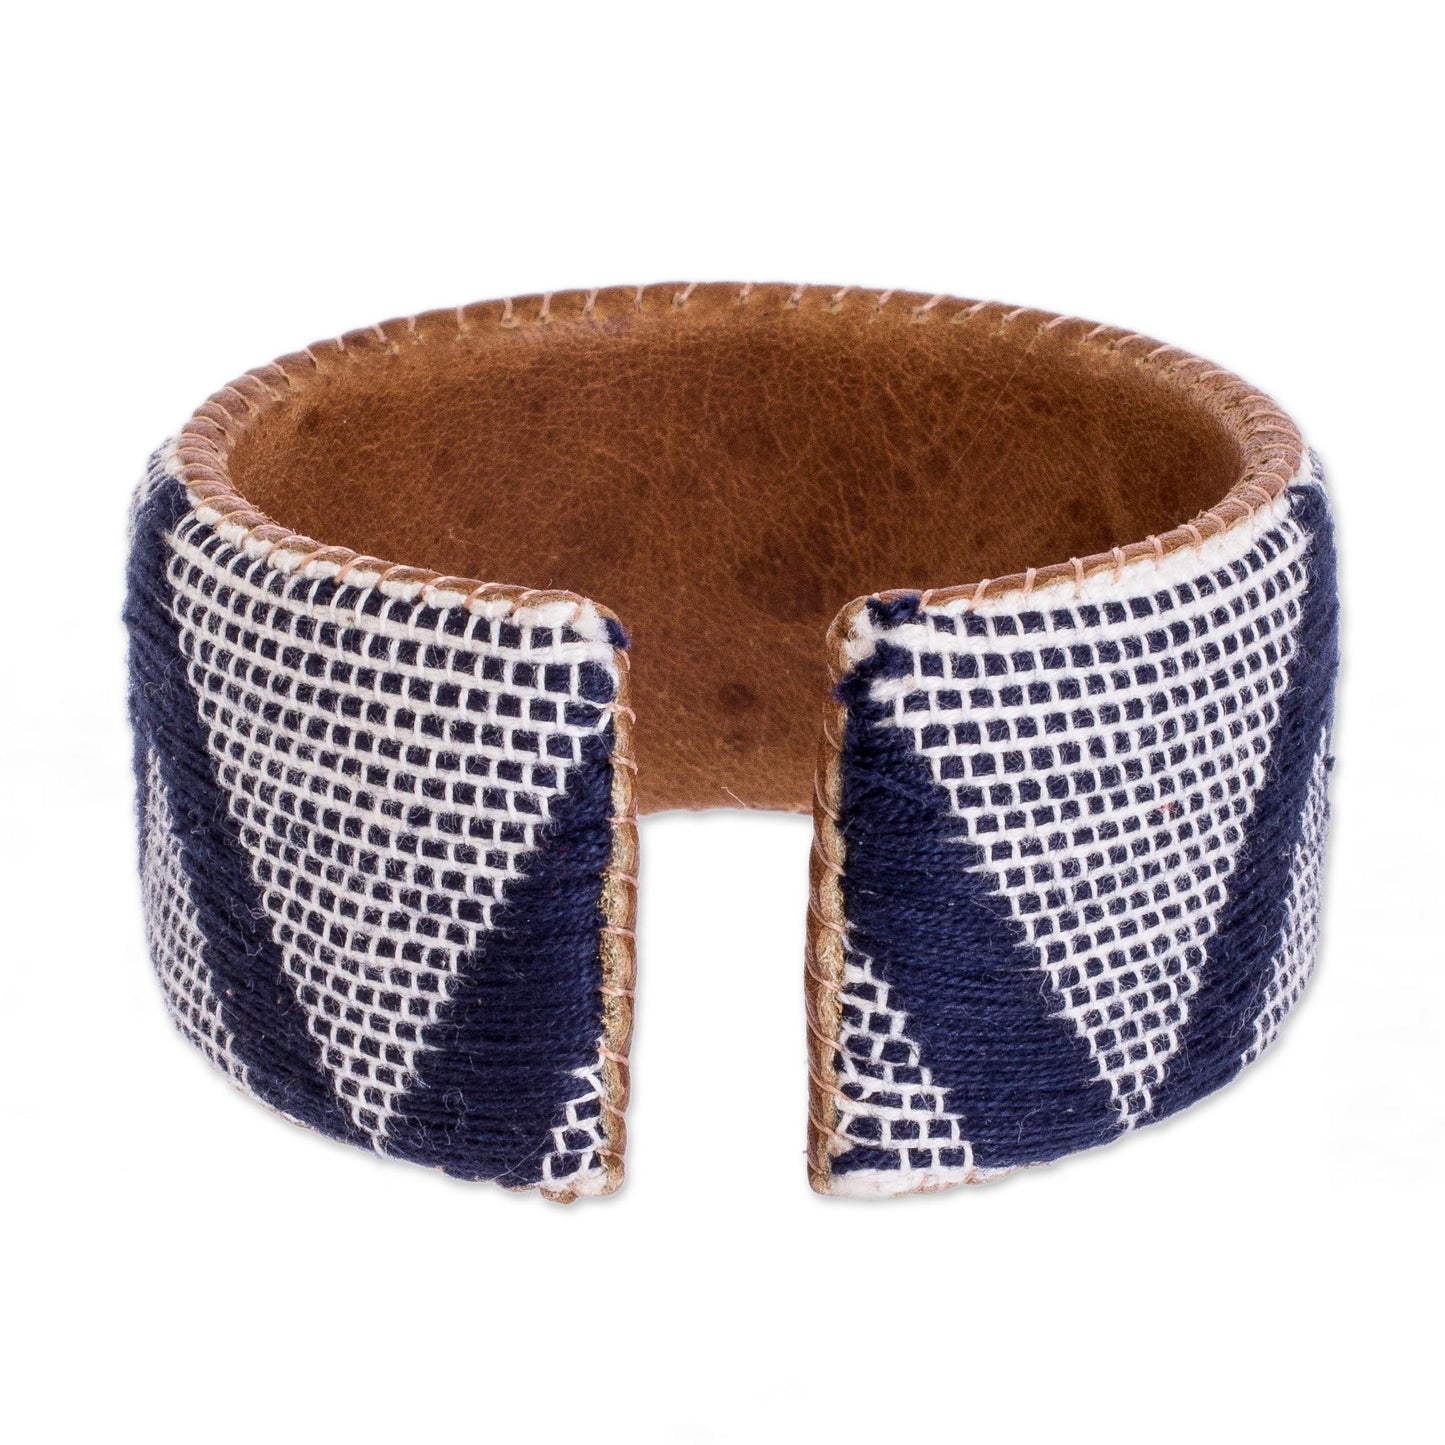 Comalapa Highlands in Blue Artisan Crafted Blue and White Bracelet